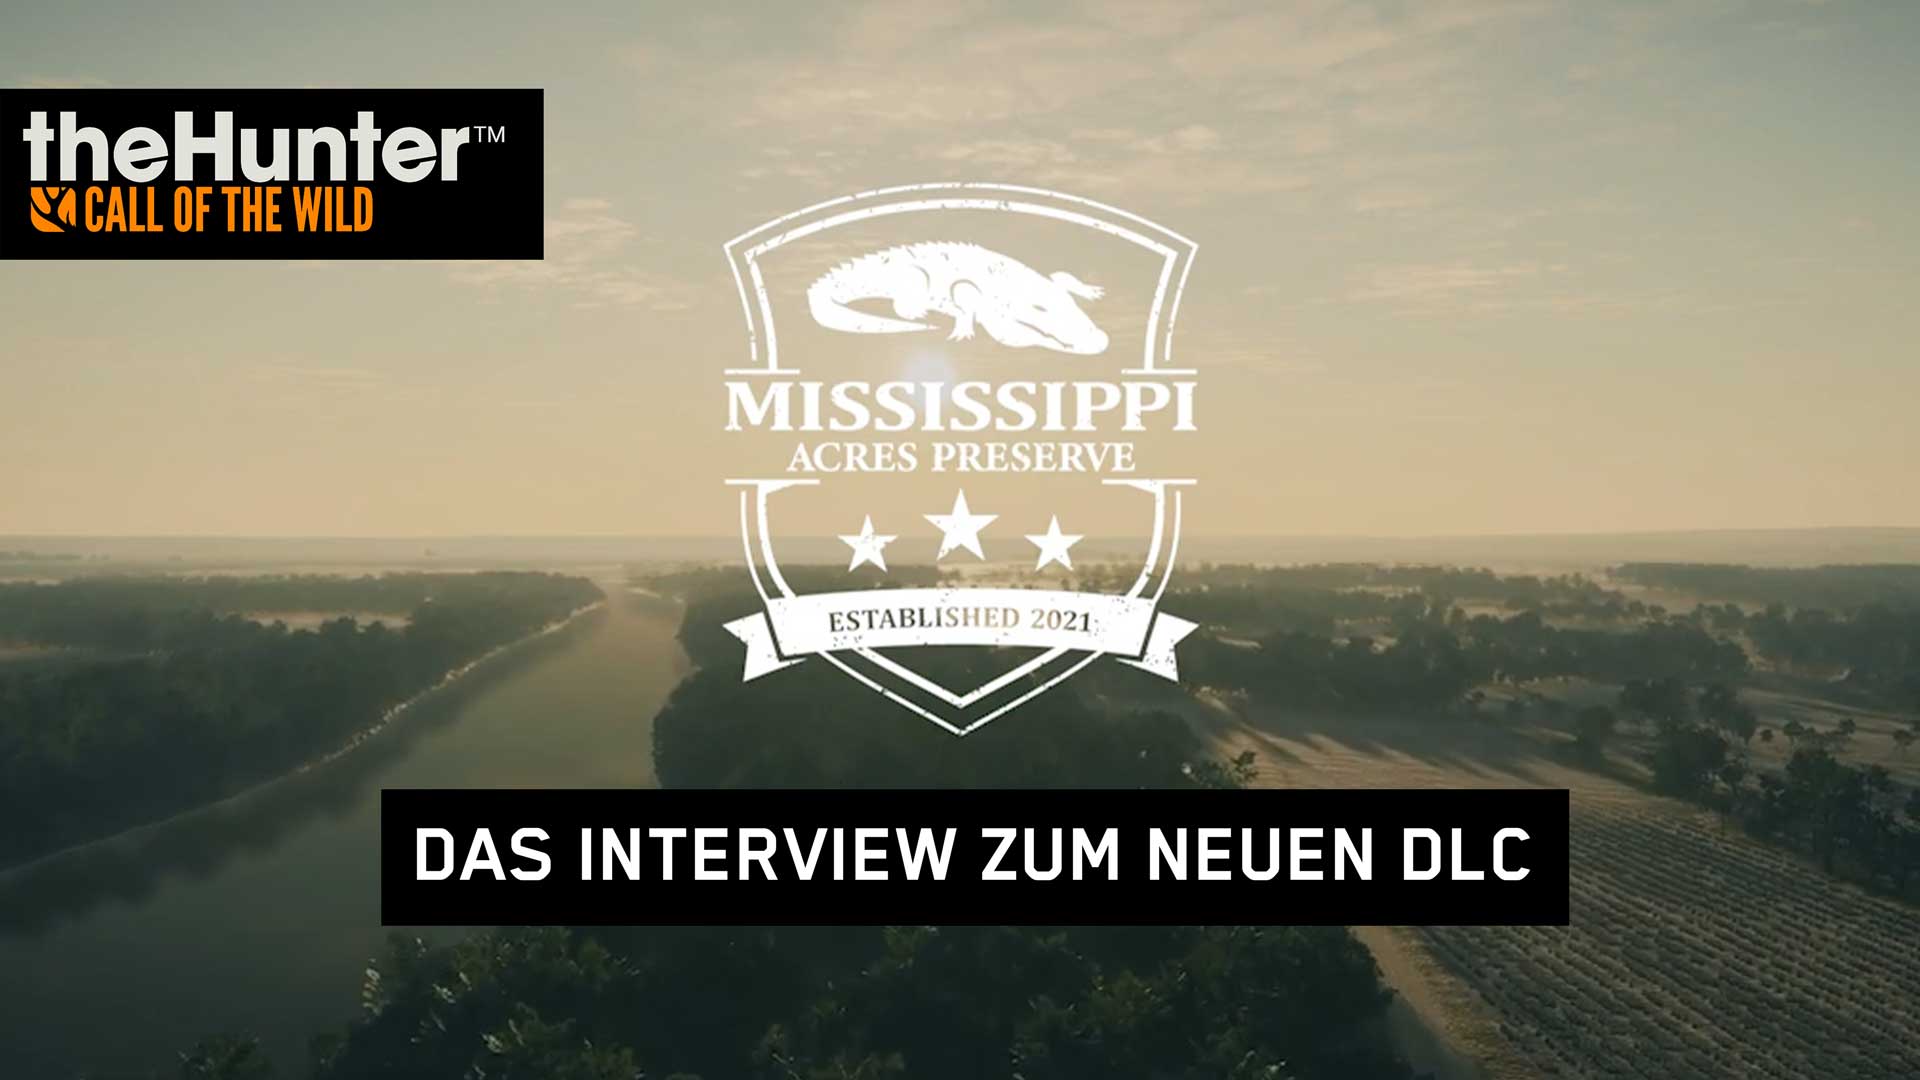 thehunter cotw mississippi interview